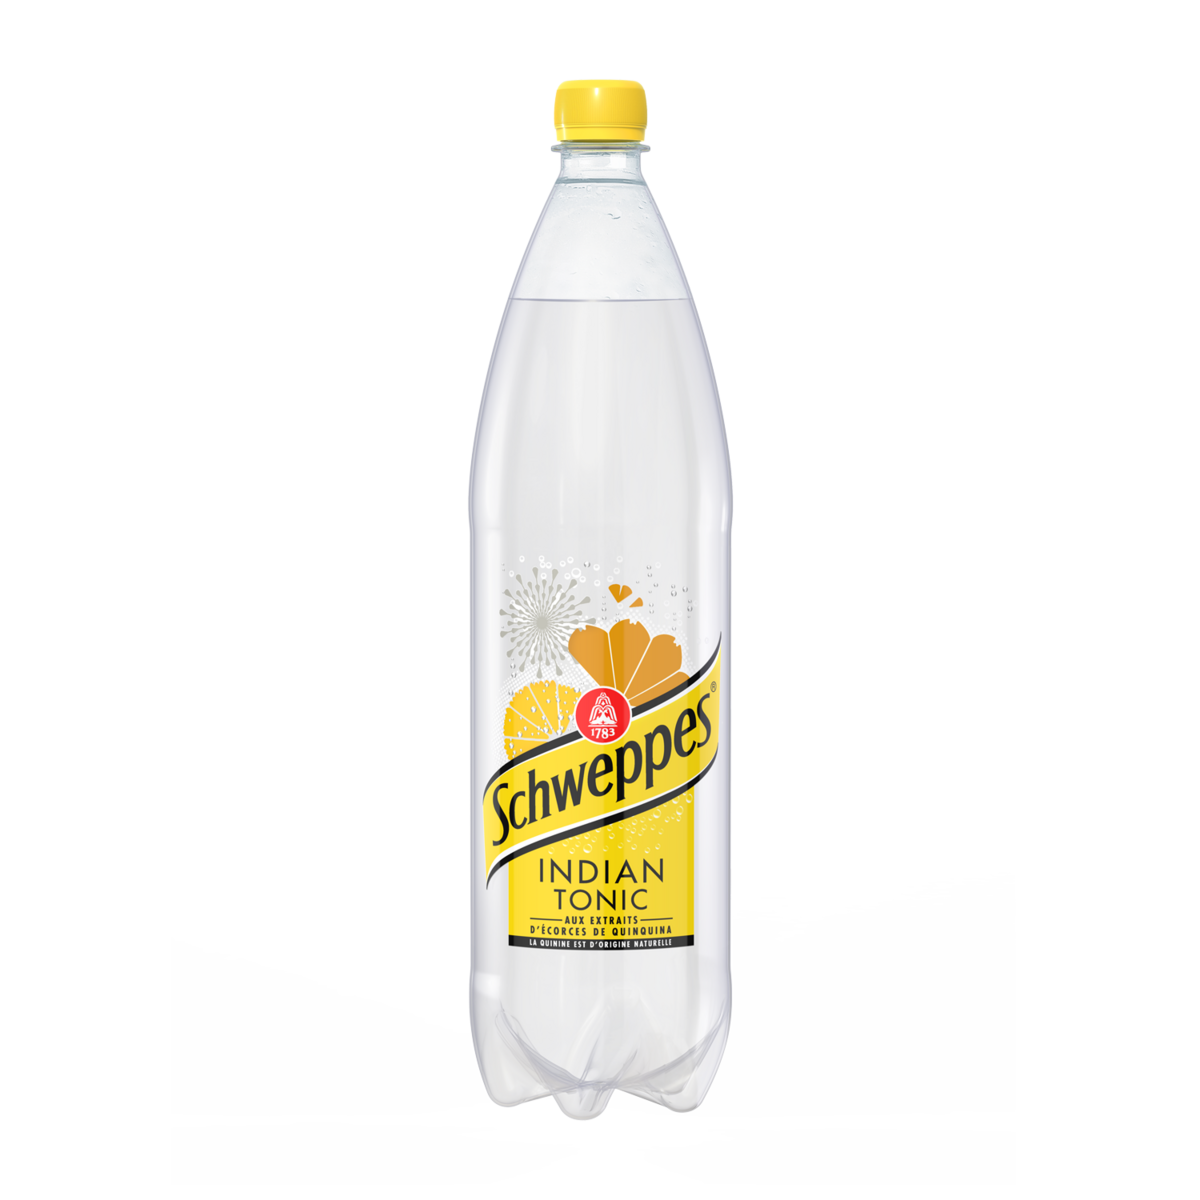 SCHWEPPES INDIAN TONIC